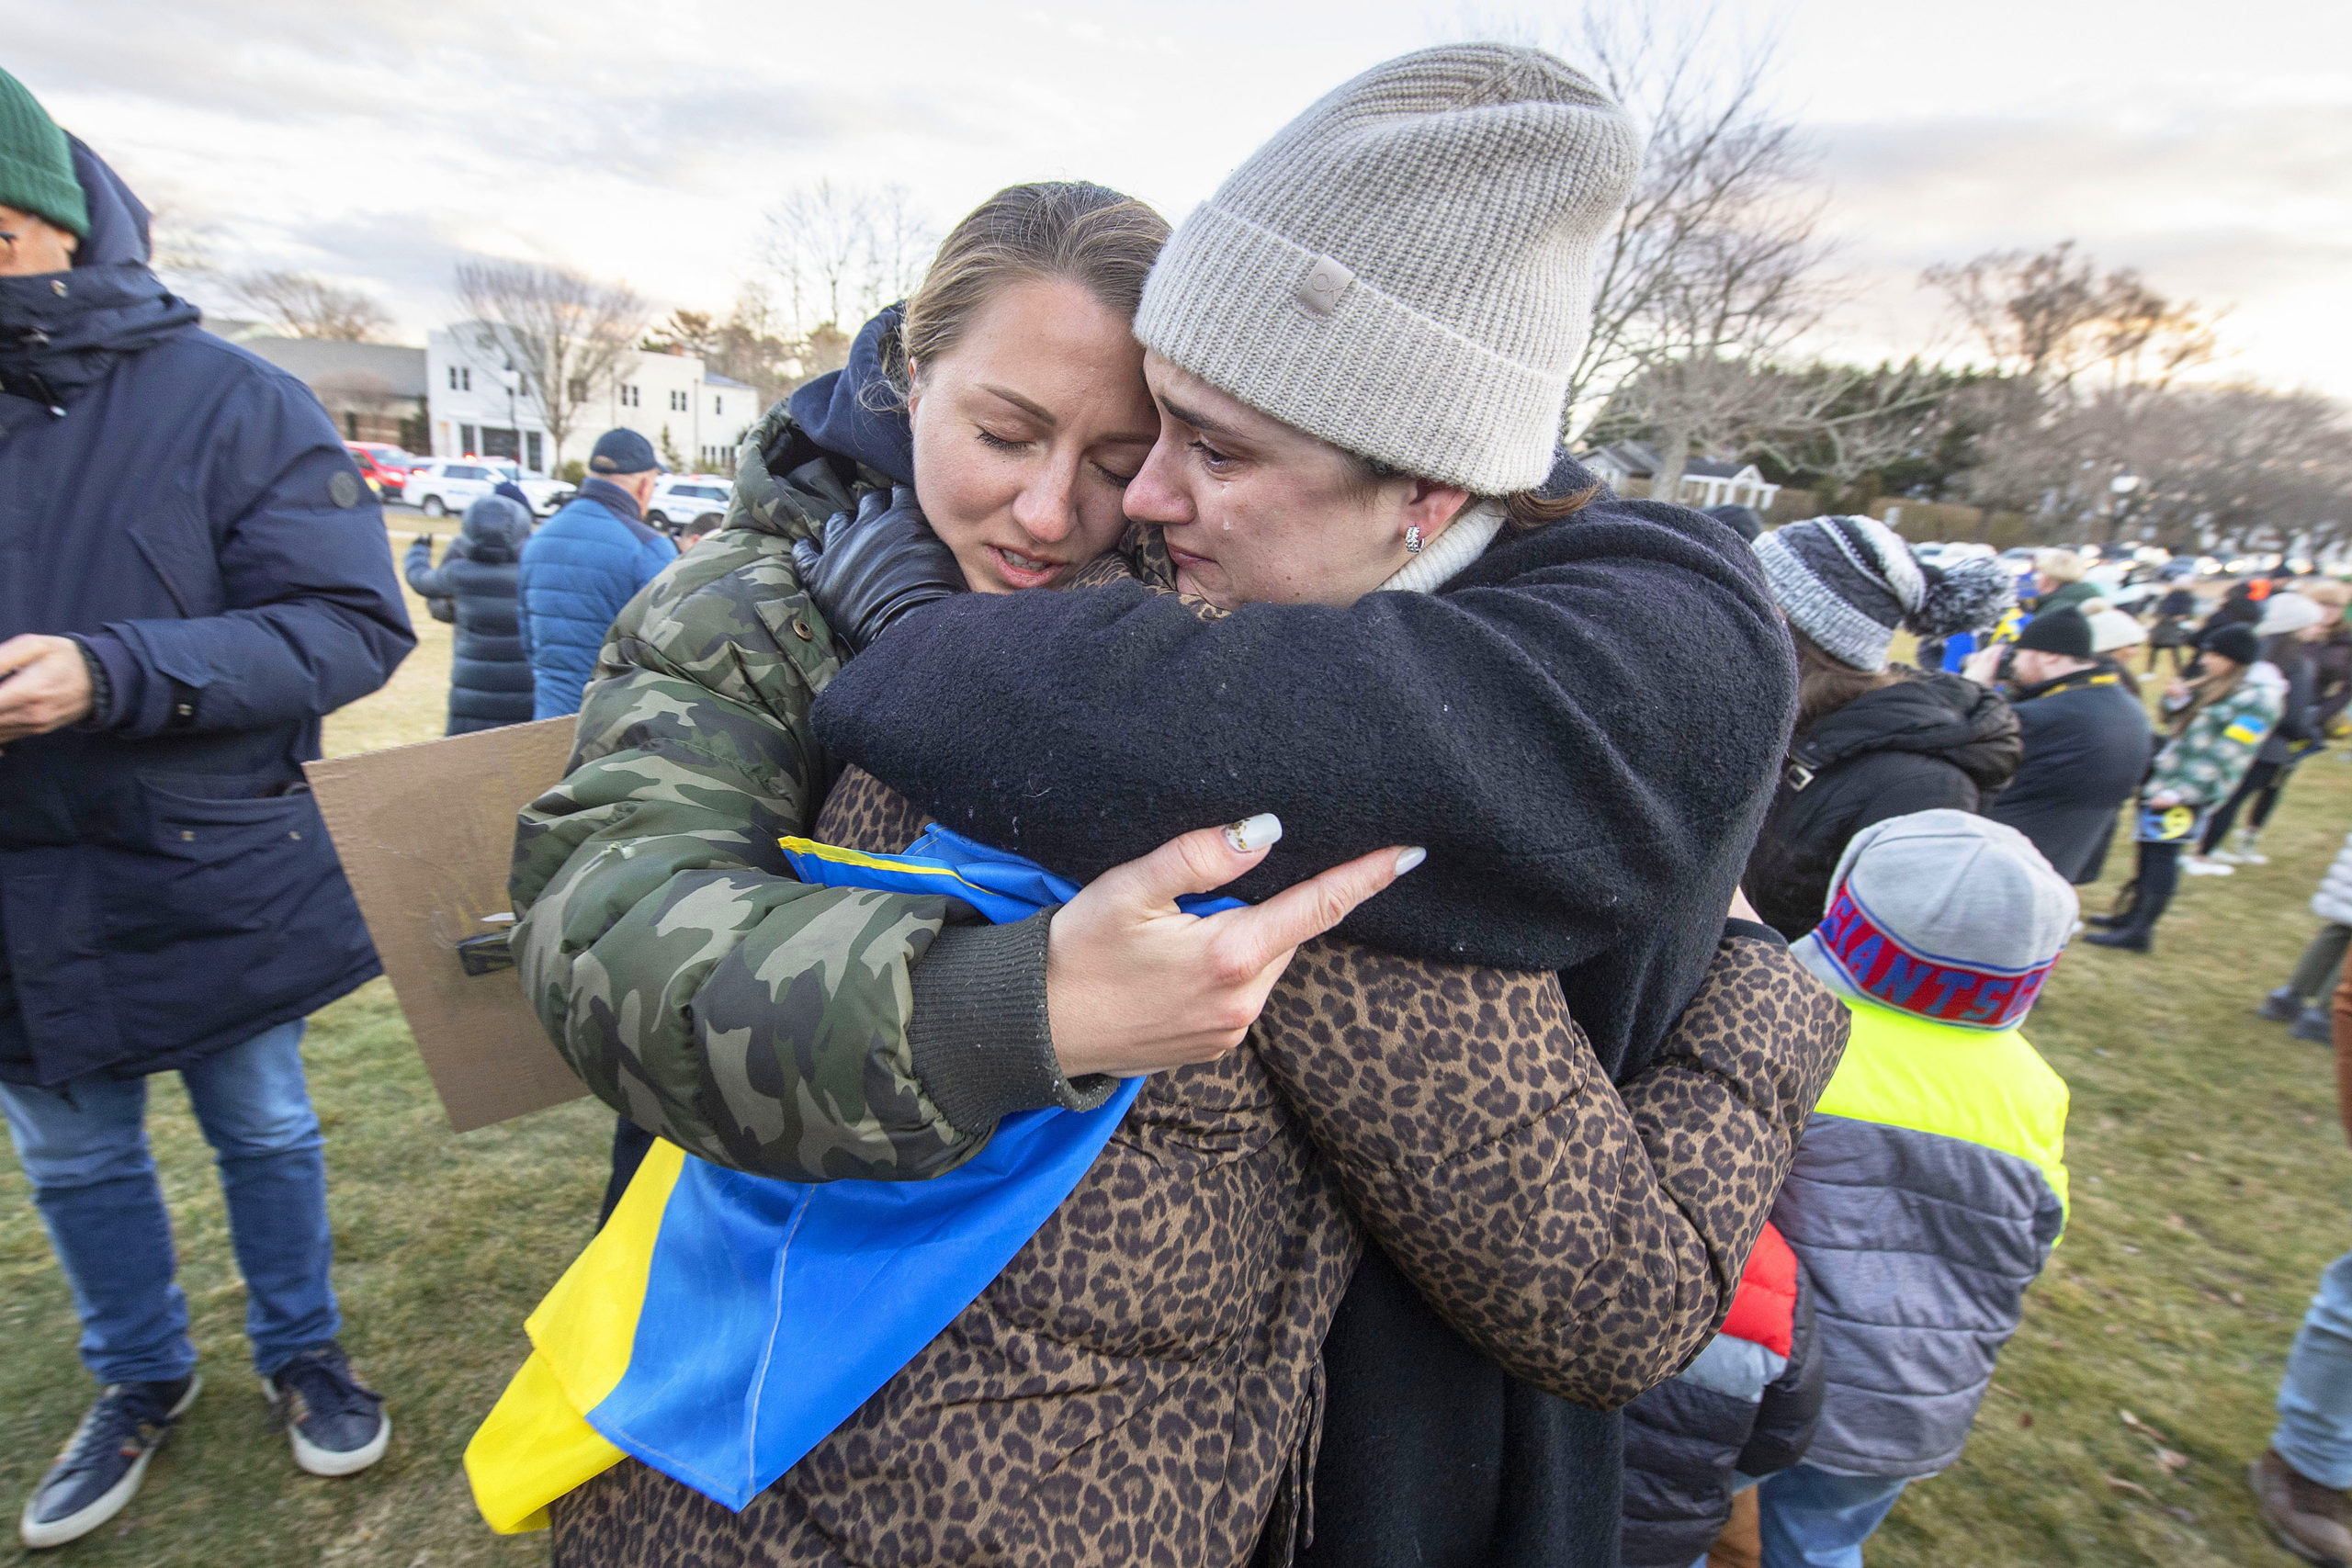 Vira Palamarchuk, center, whose father is fighting on the front lines in Ukraine, is comforted by her mother, Anya, left, and a close friend, right, who happens to be Russian, during a rally in support of Ukraine last Thursday on the Hook Mill Village Green in East Hampton.  MICHAEL HELLER